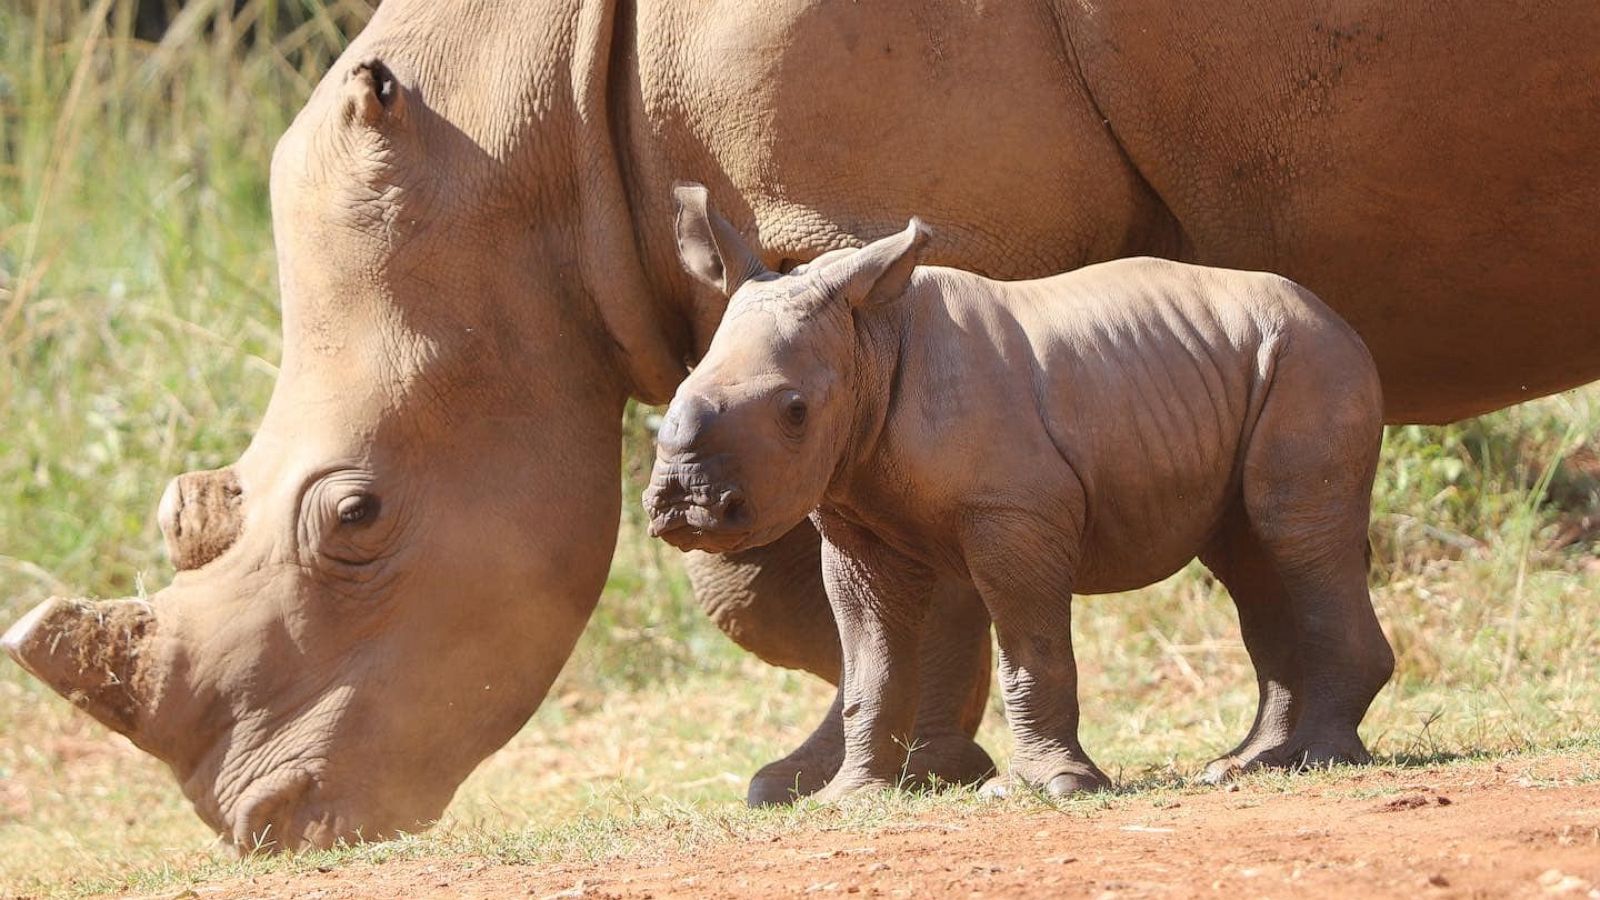 A legal trade in rhino horn could be twice as big as illegal one